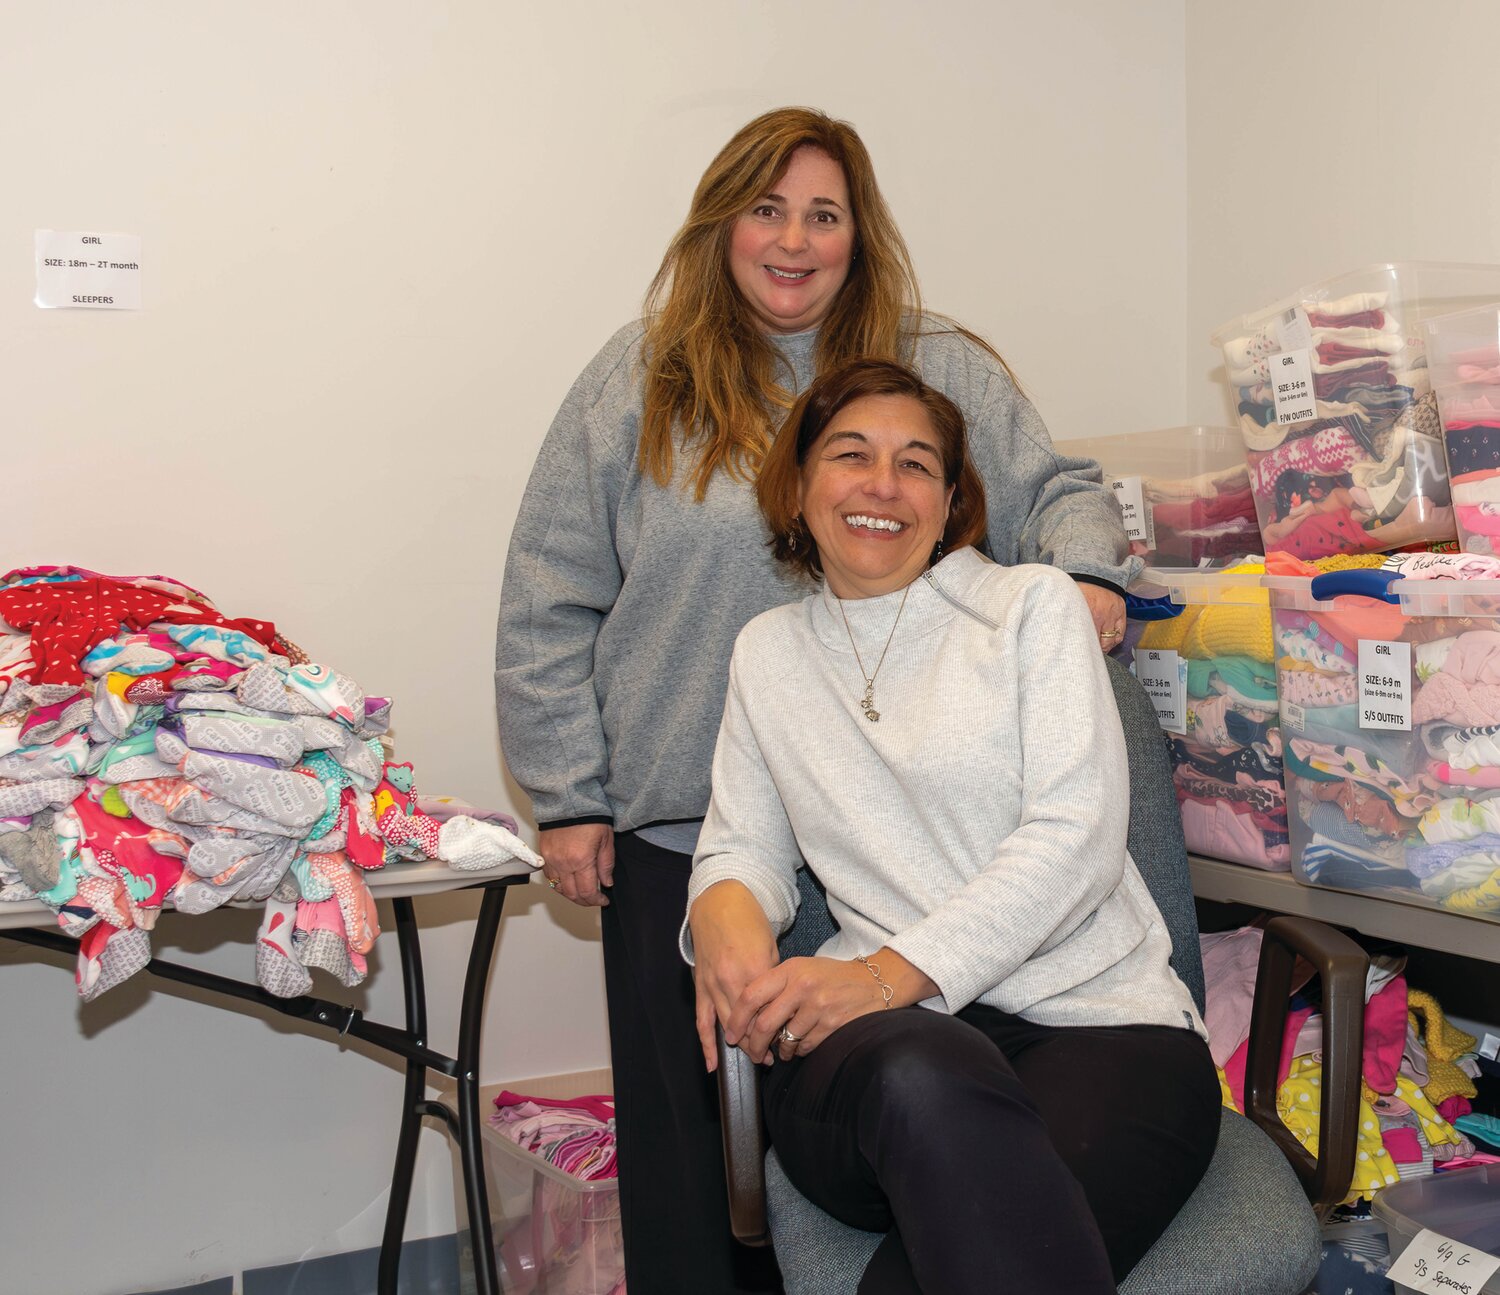 Laurieann Tebben, executive director, and Chris Berkowitz, operations director, run nonprofit The Baby Bureau, which provides everything babies need to those who need them most.